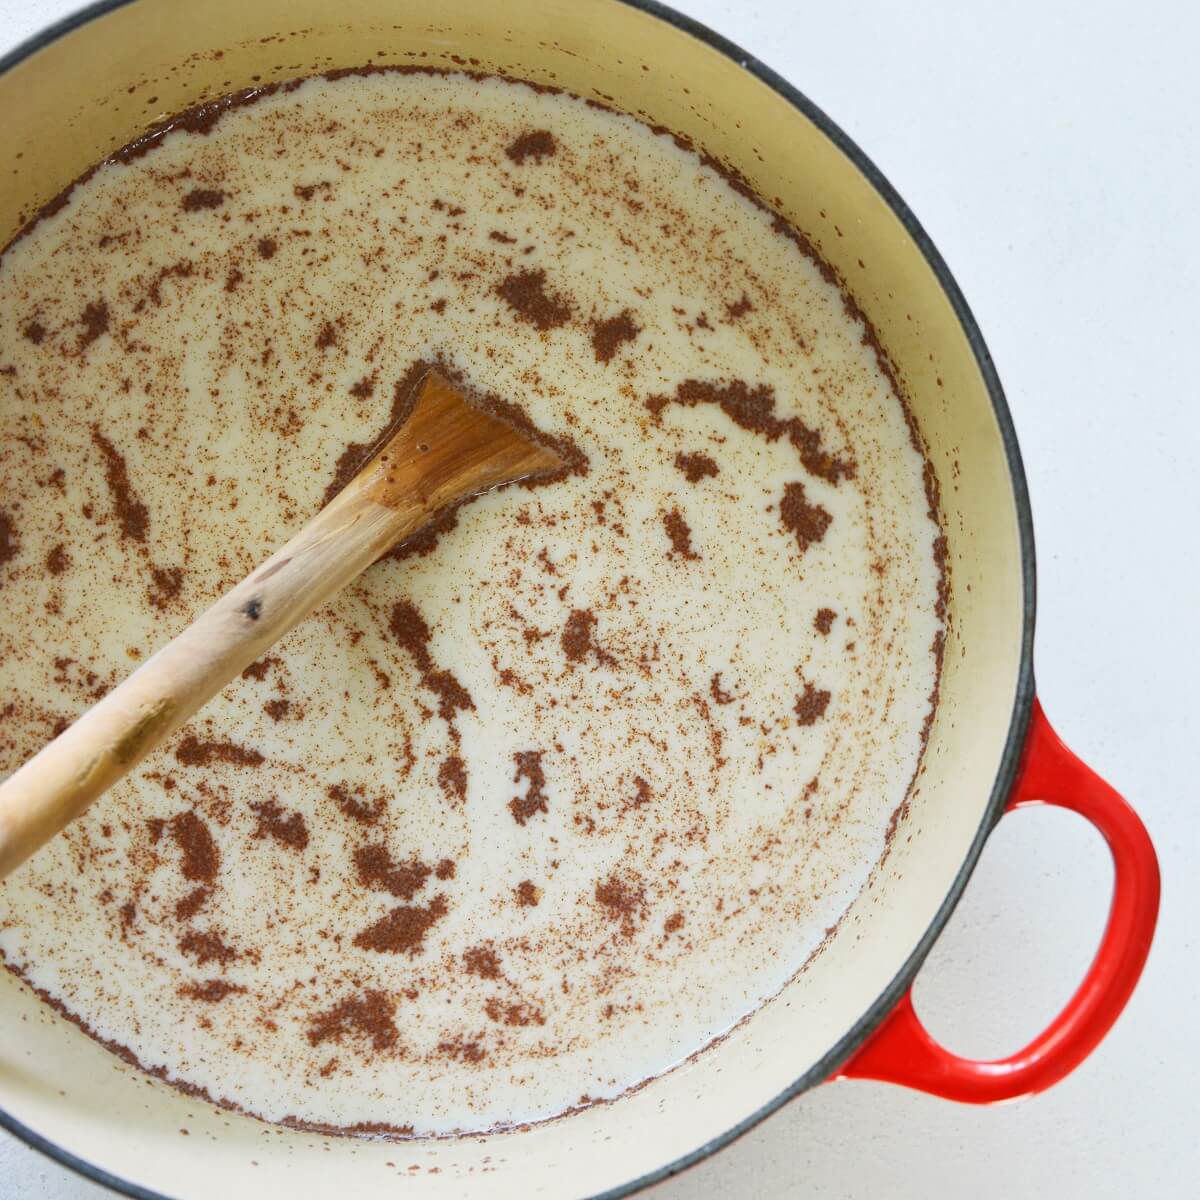 Swirls of ground cinnamon in old fashioned rice pudding.